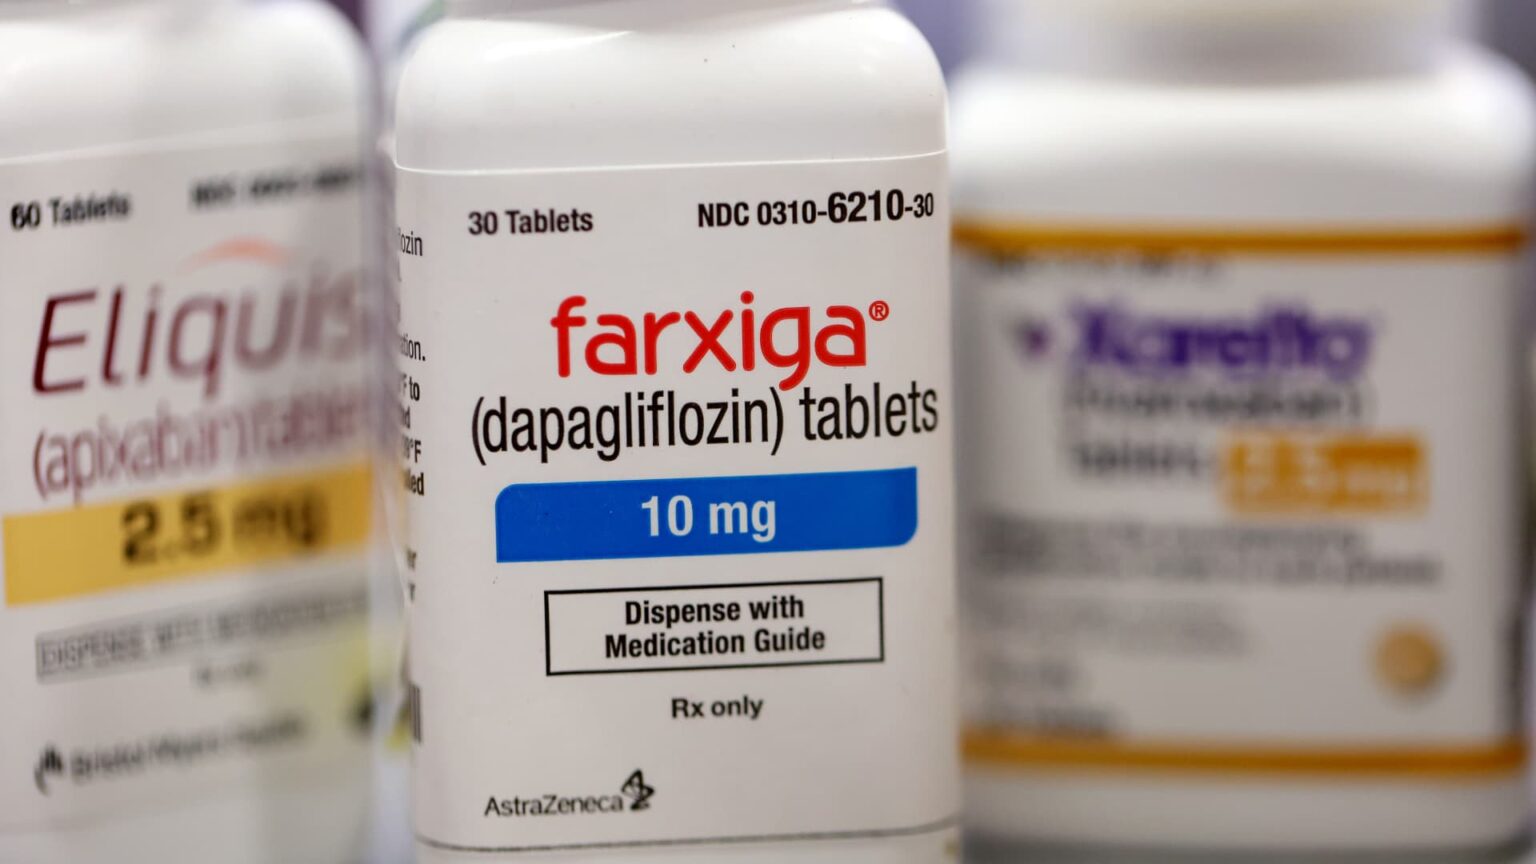 Diabetes drug makers to participate in Medicare negotiations